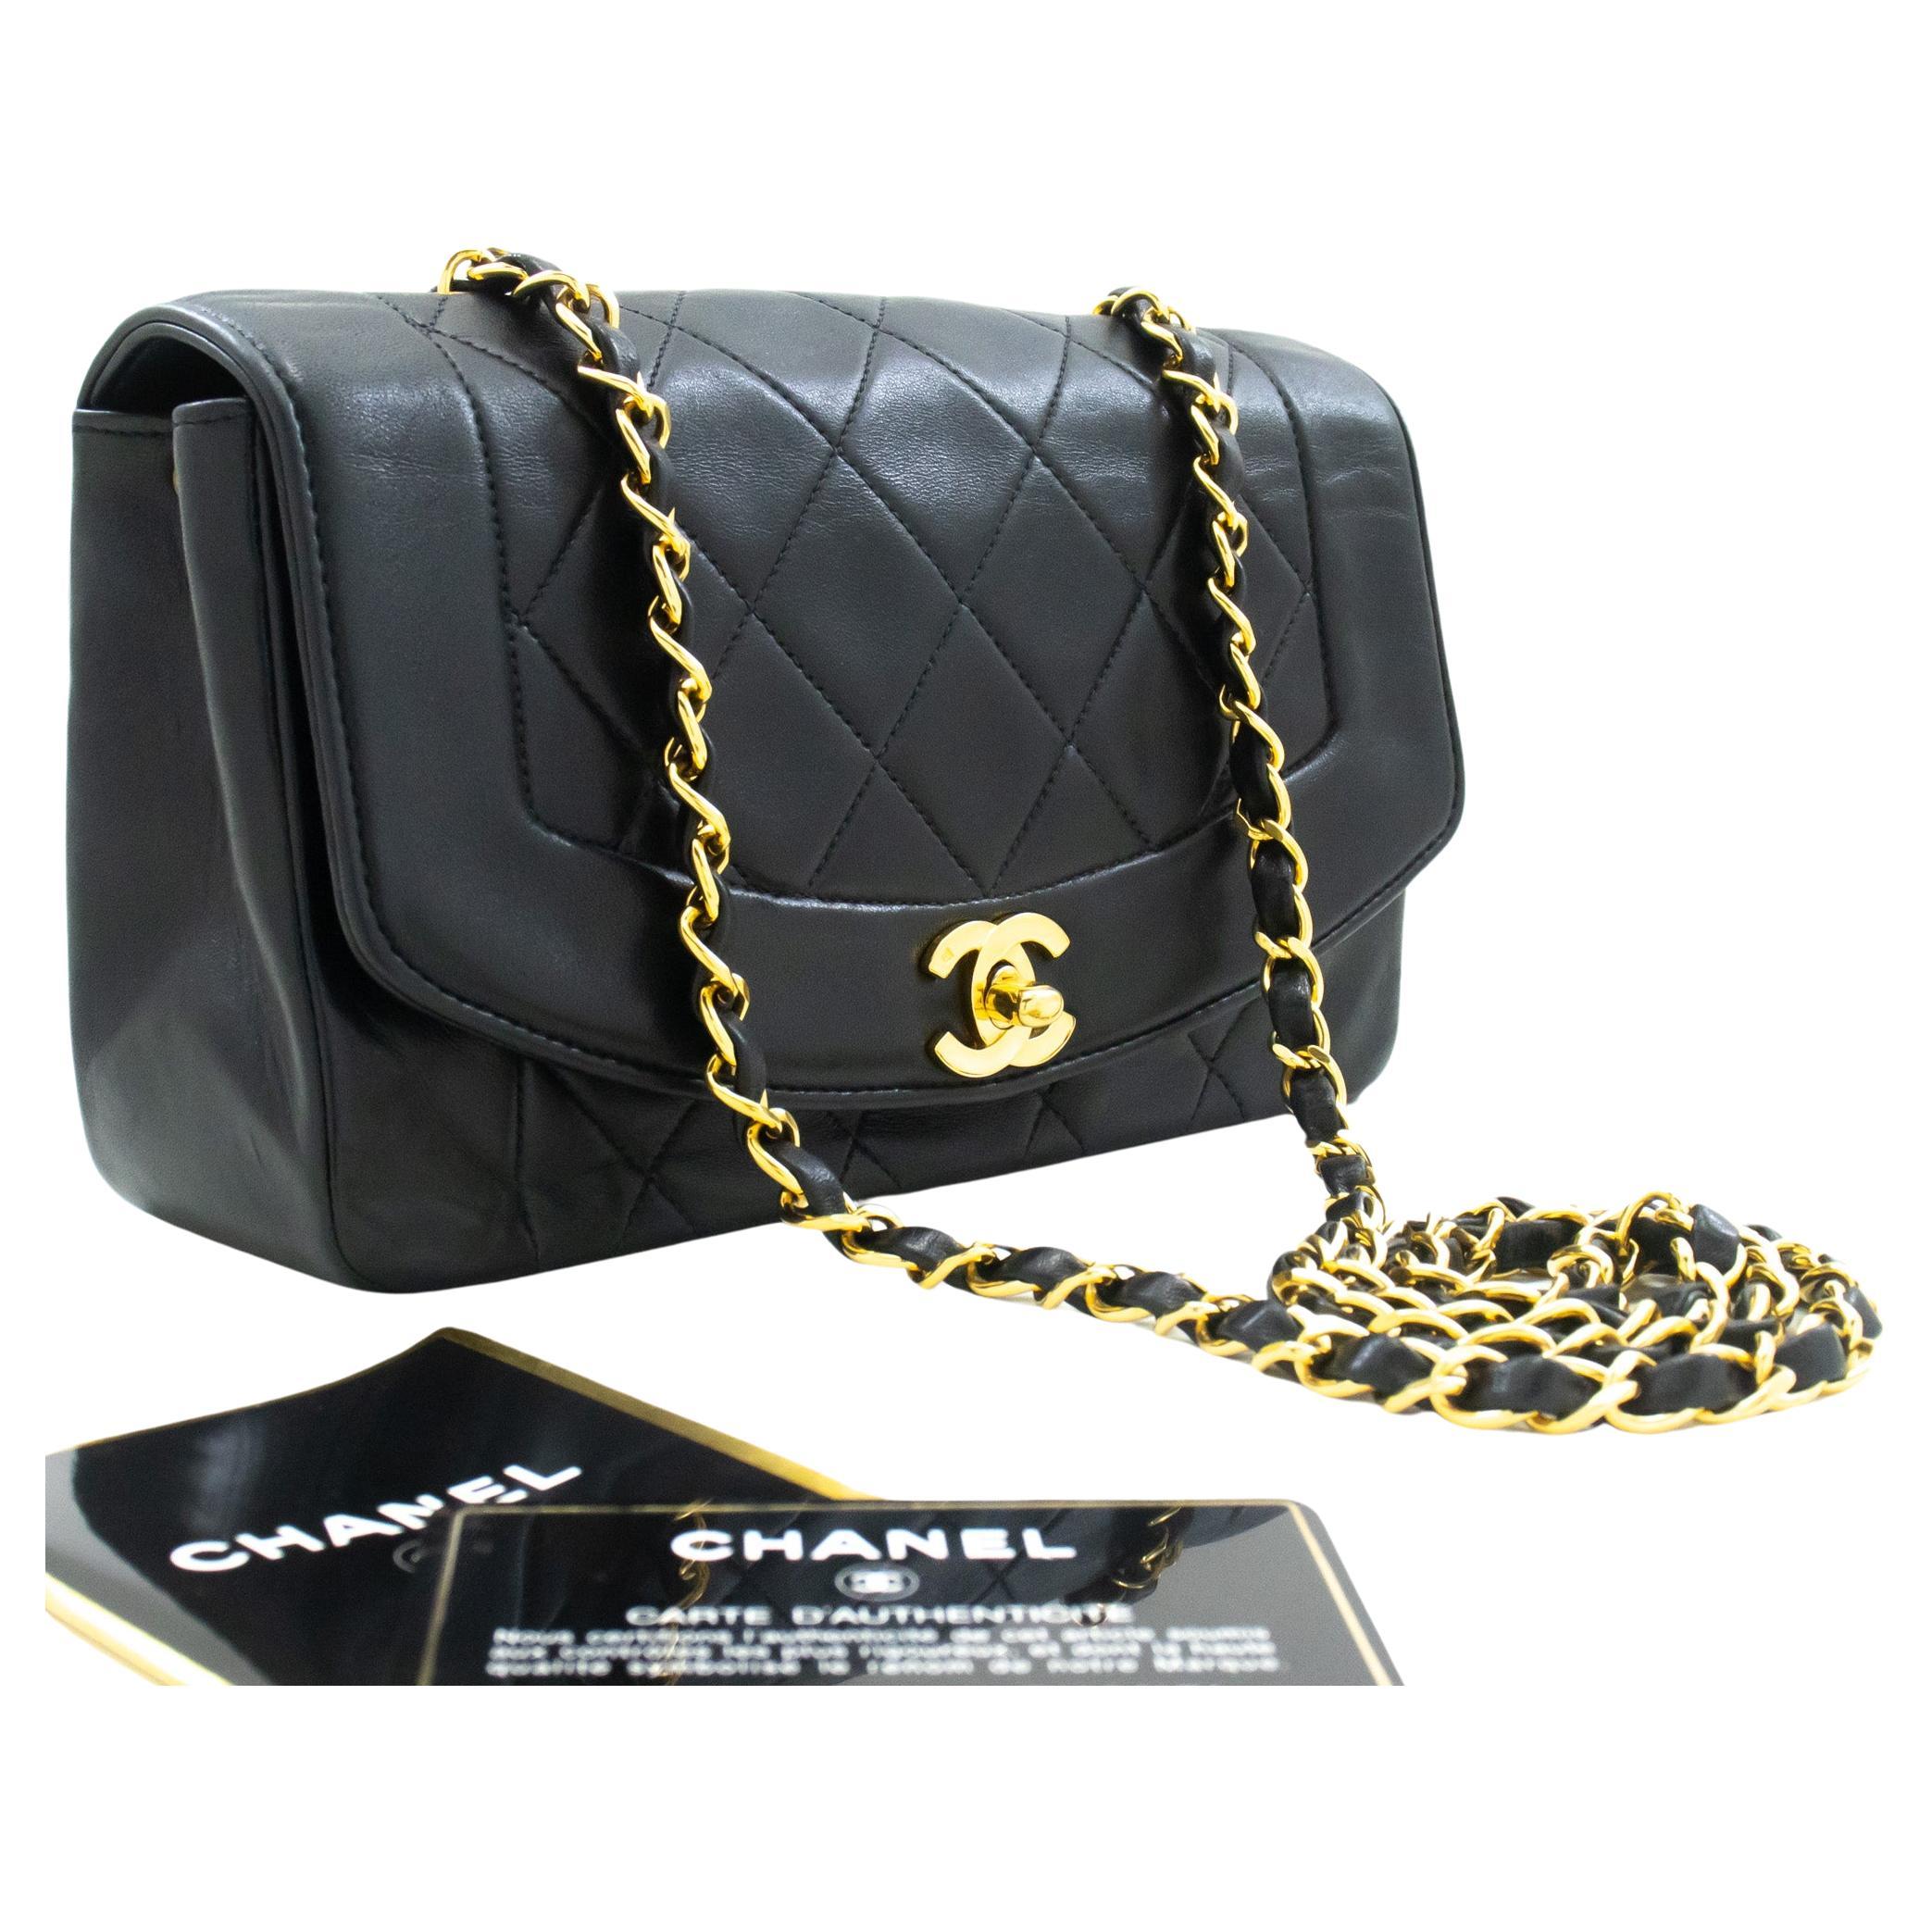 How do you date a vintage Chanel bag?